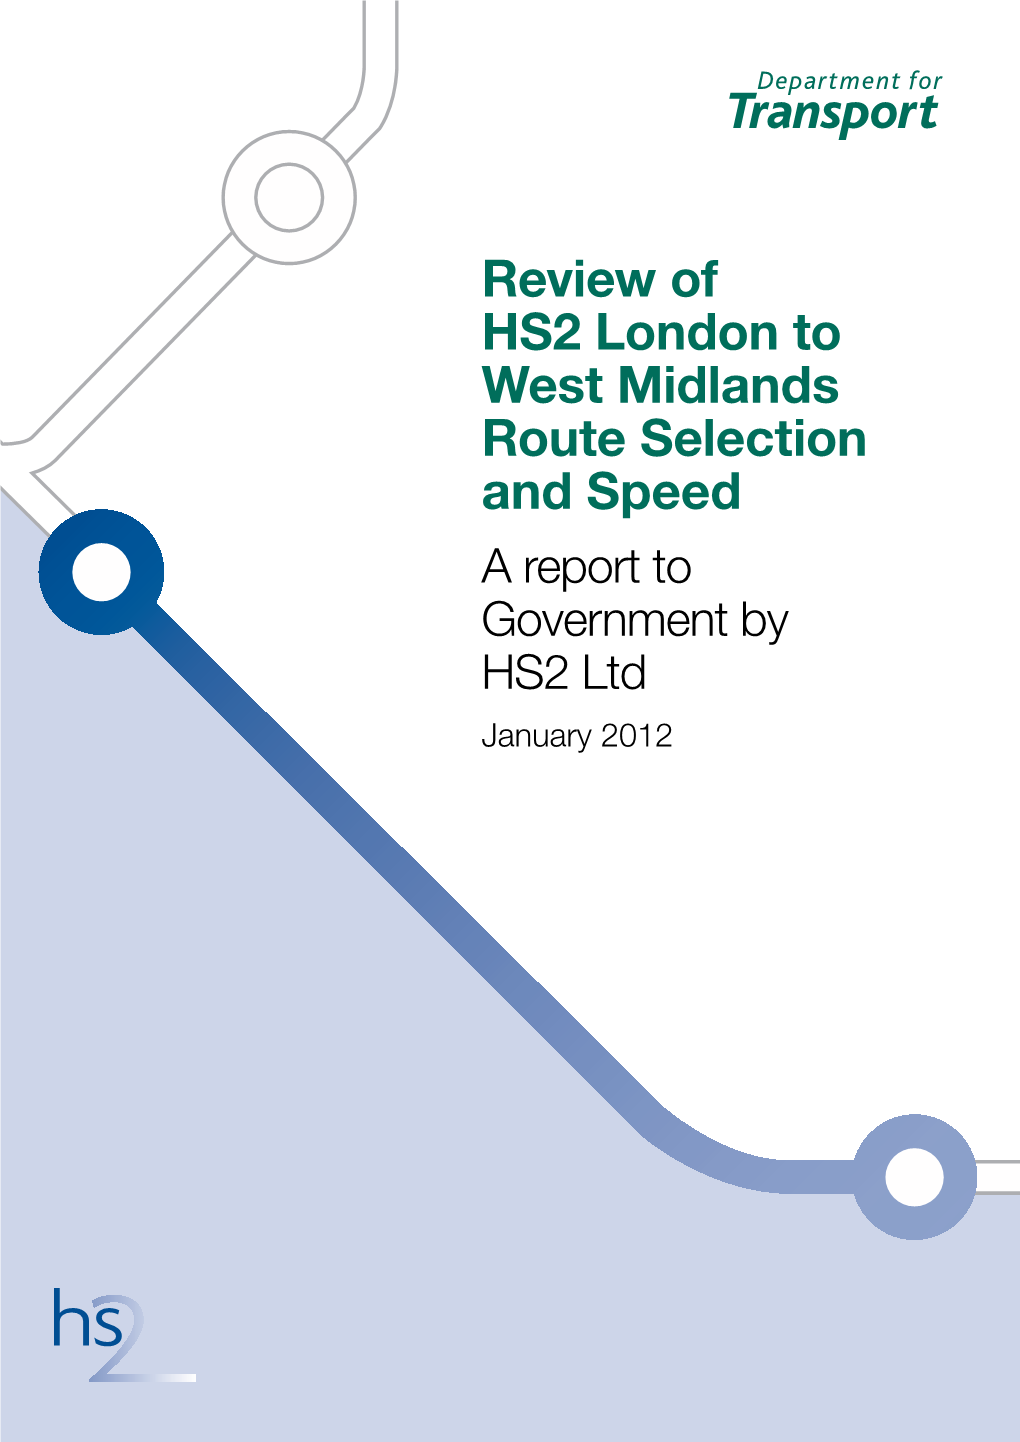 Review of HS2 London to West Midlands Route